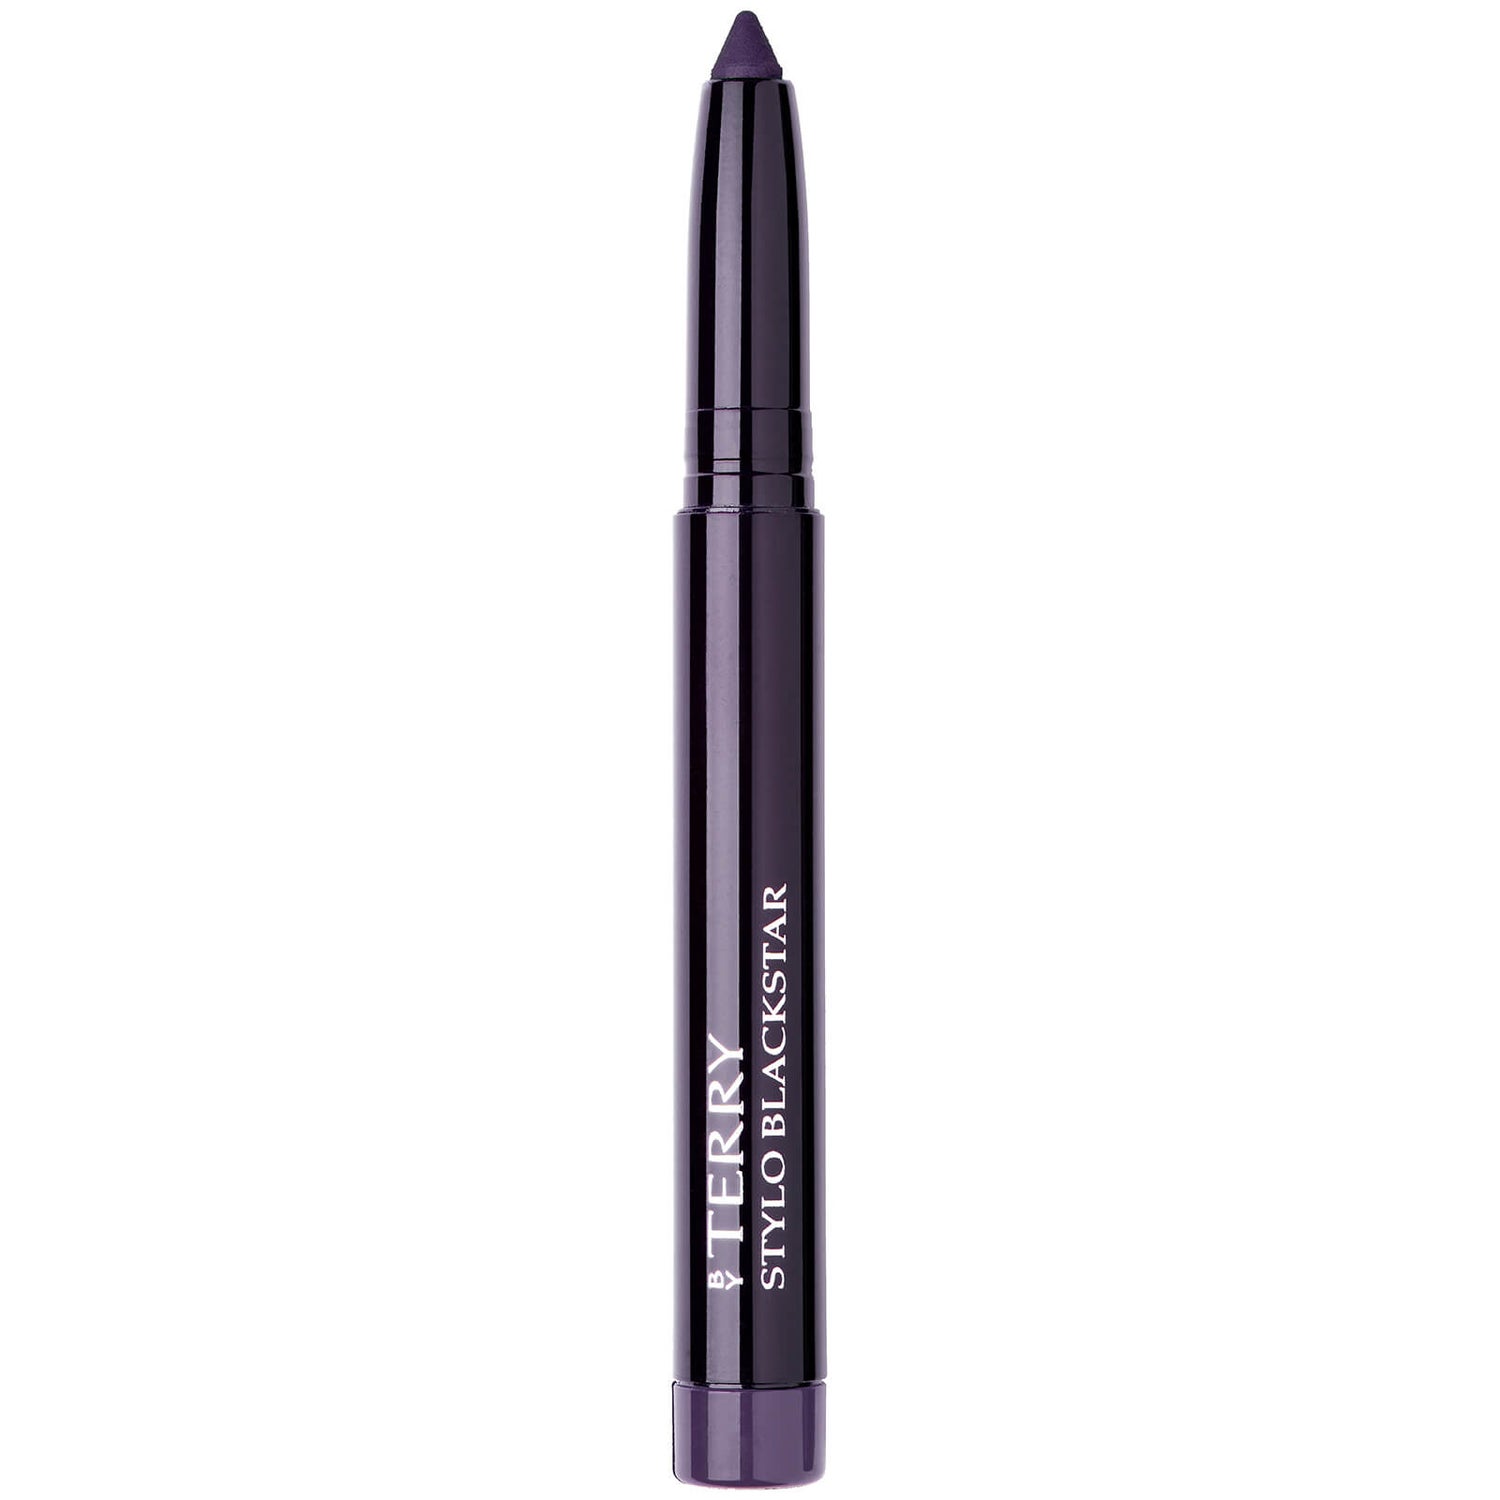 By Terry Stylo Blackstar Eye Liner 1.4g (Various Shades)